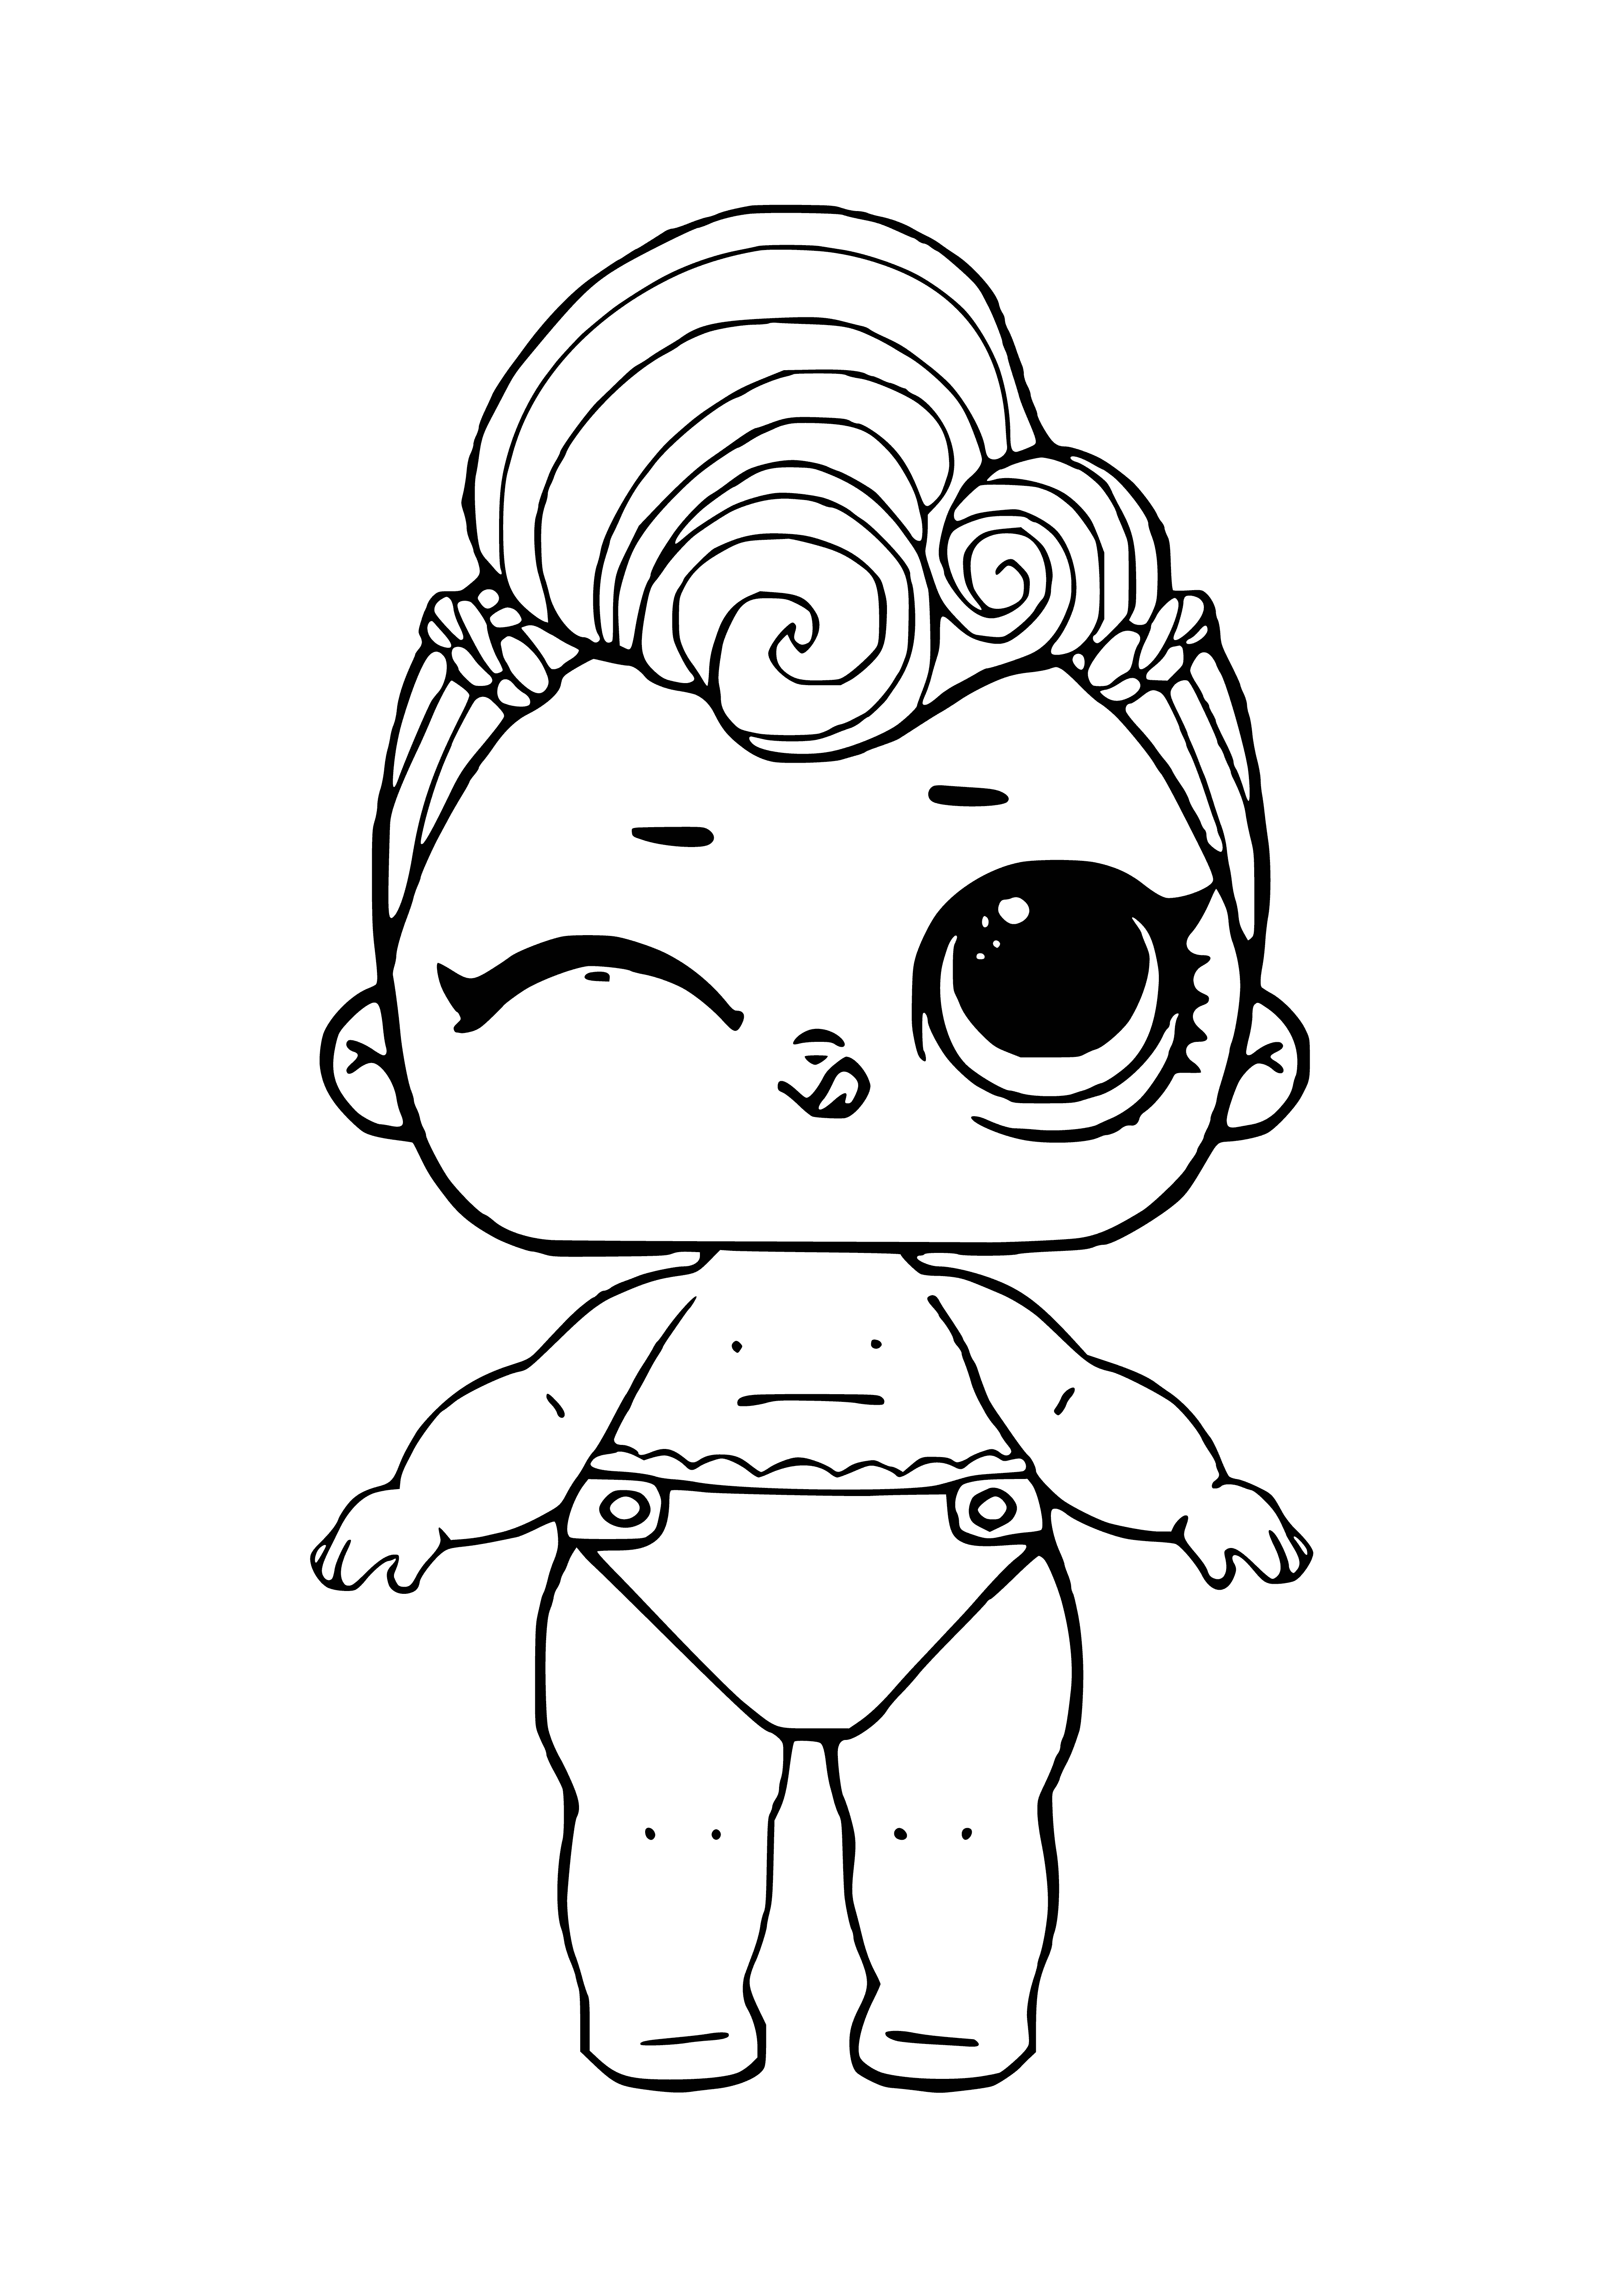 Lol lil stardust coloring page